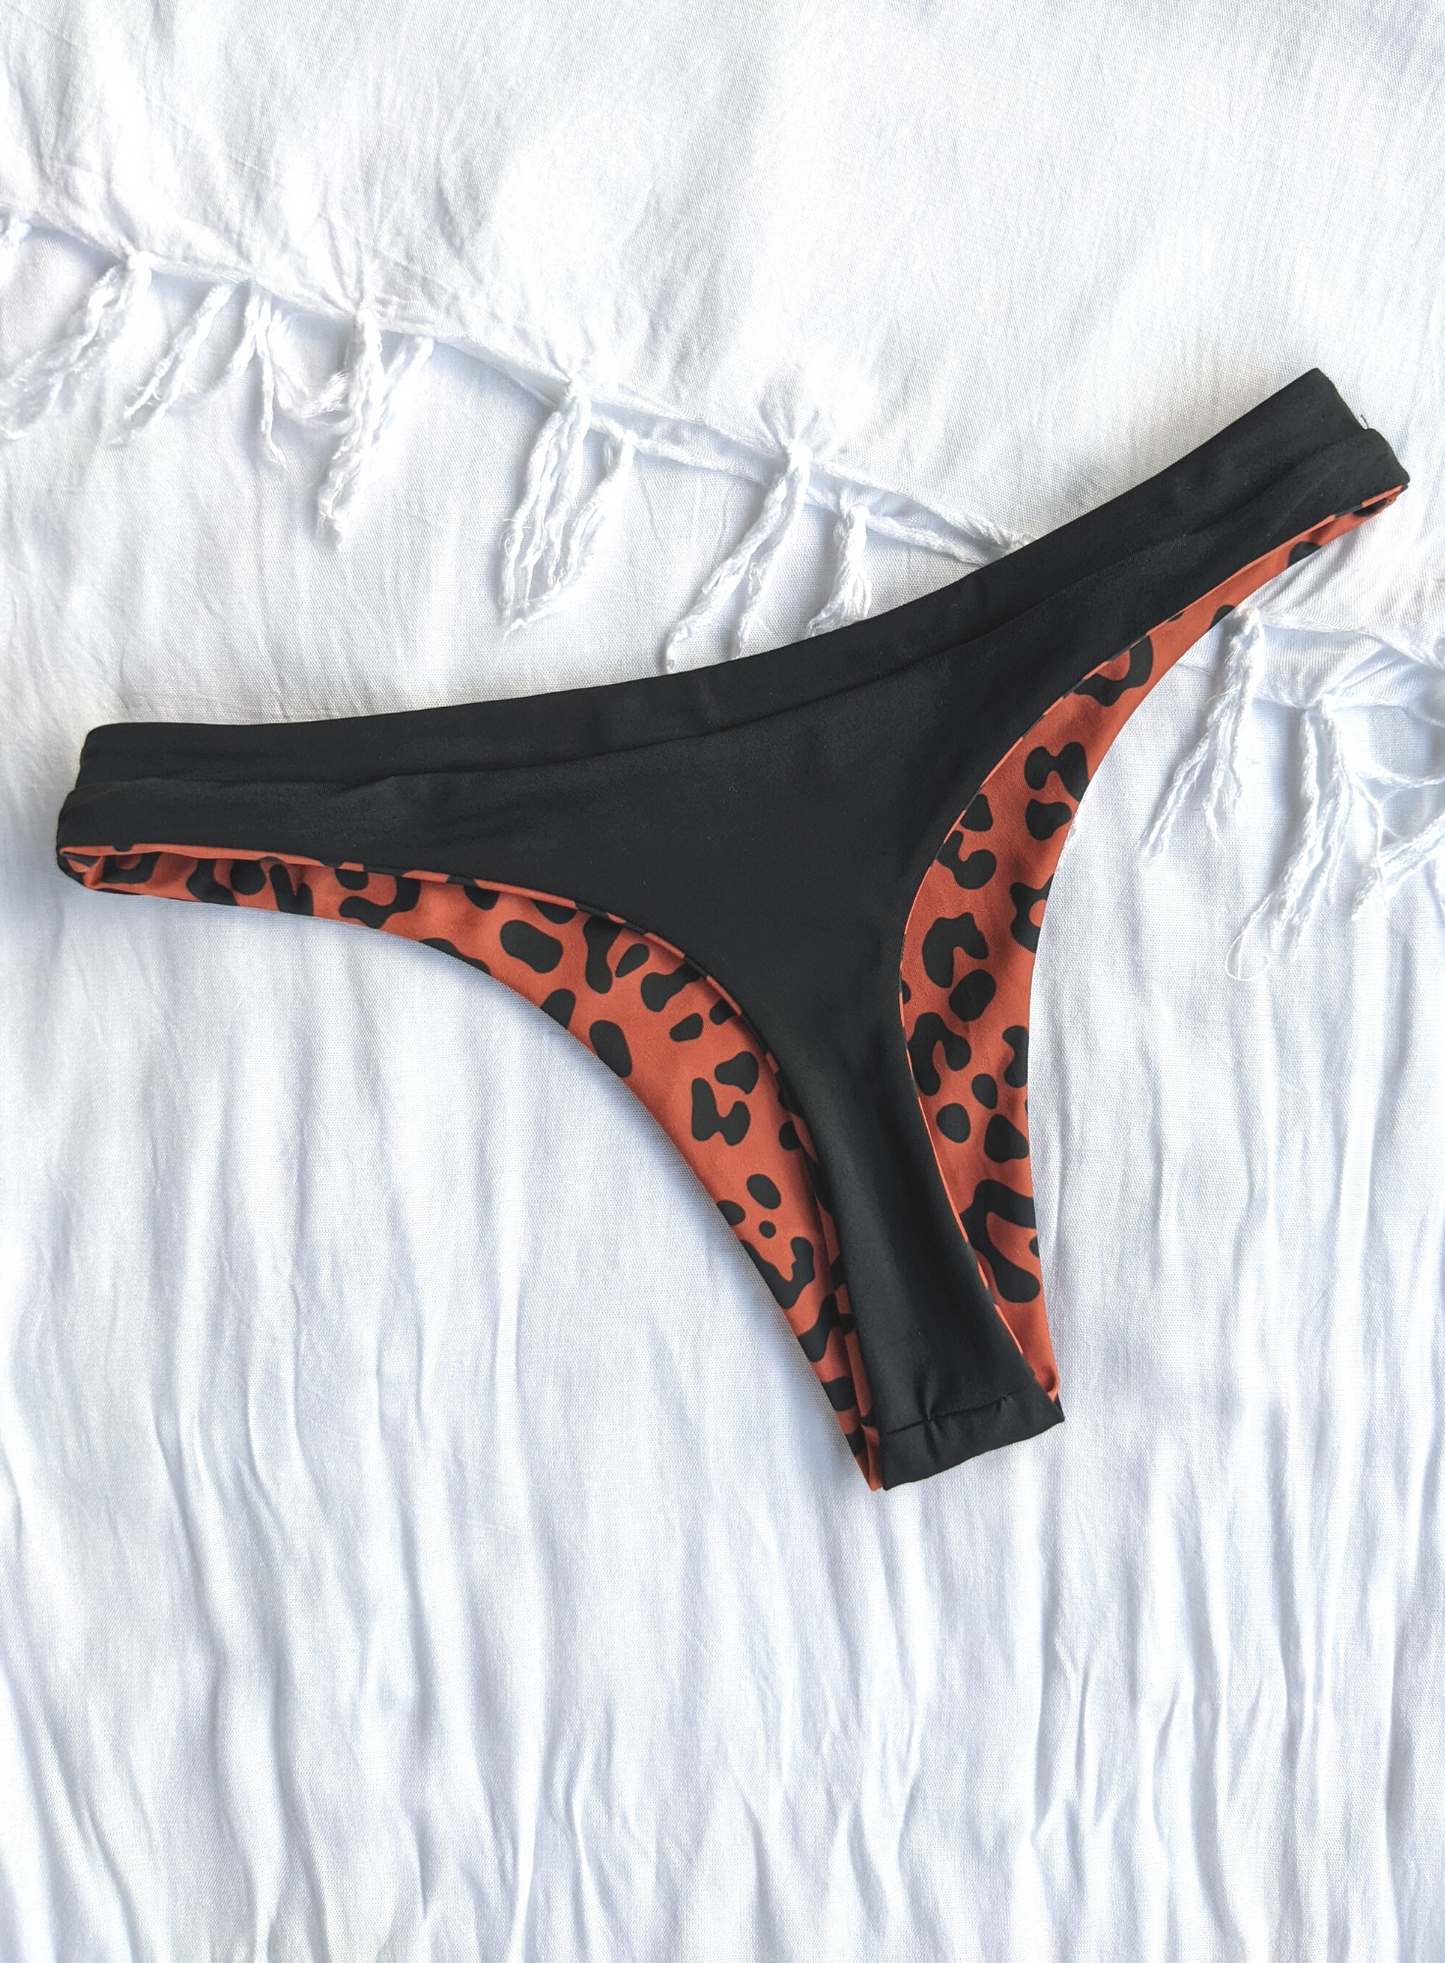 Reversible Black and Leopard Print Skimpy Cut Bikini Bottom Made From Eco Friendly Recycled Regenerated Nylon Fabric Leopard Print Back Flat Lay View